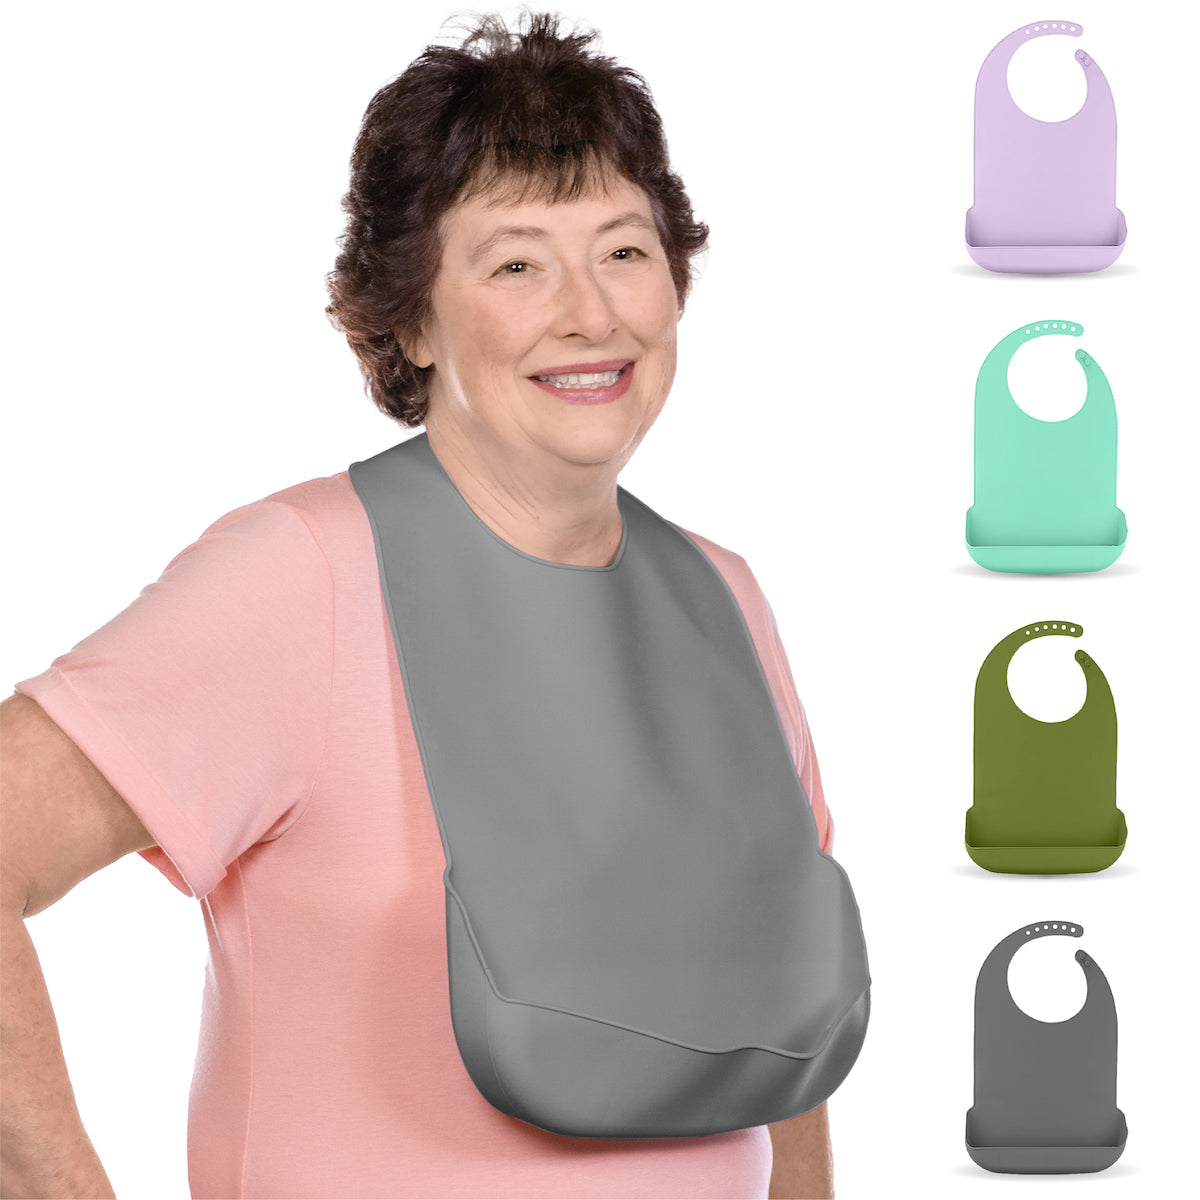 dark grey silicon adult bib to protect clothes while eating